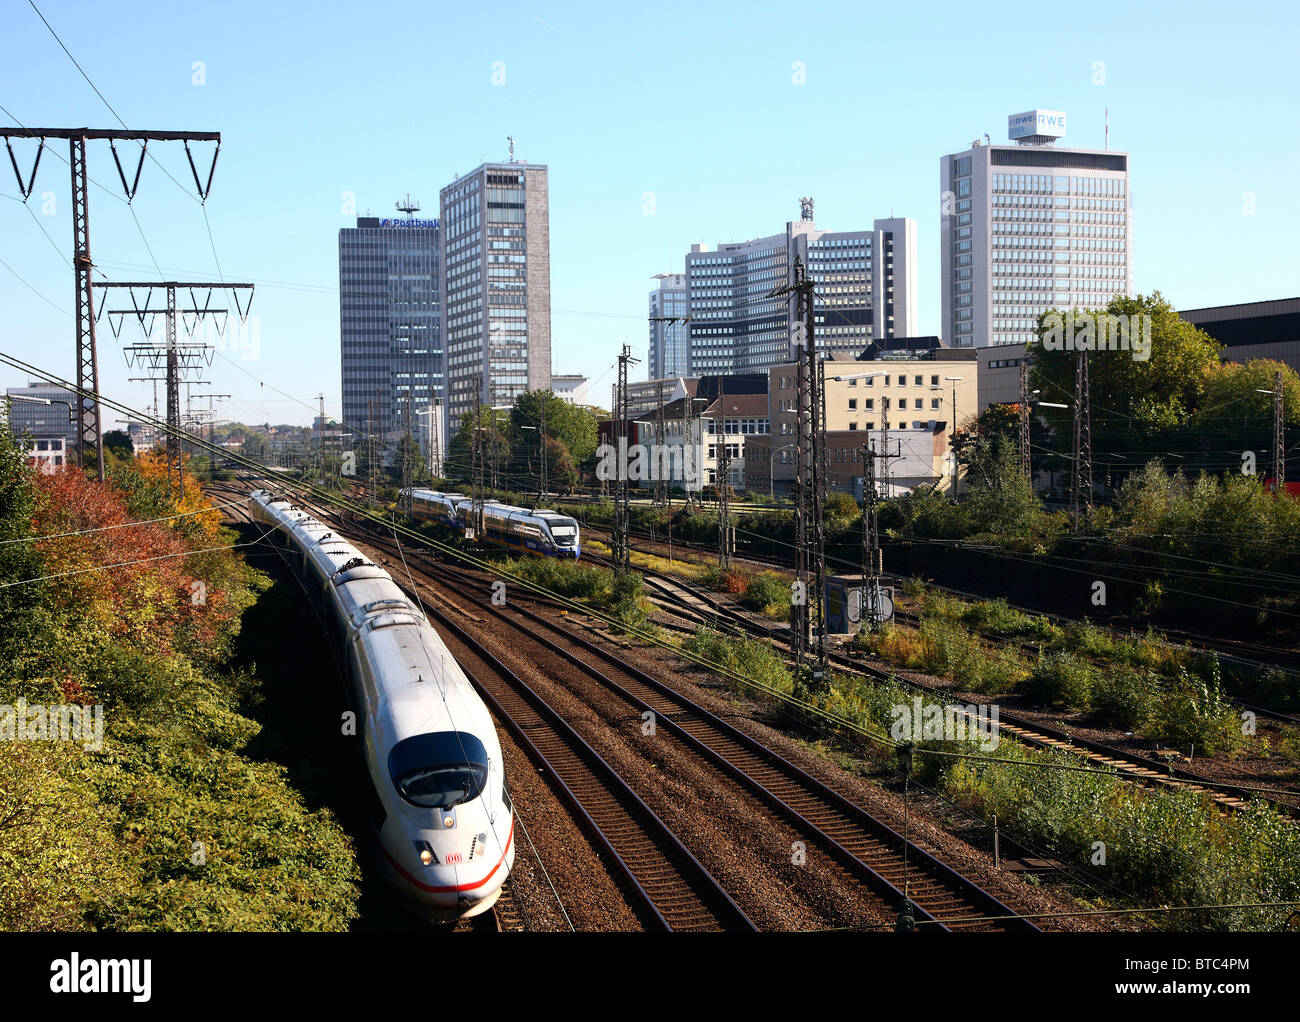 Skyline of Essen, Germany. Business district. ICE high speed train on track. Stock Photo